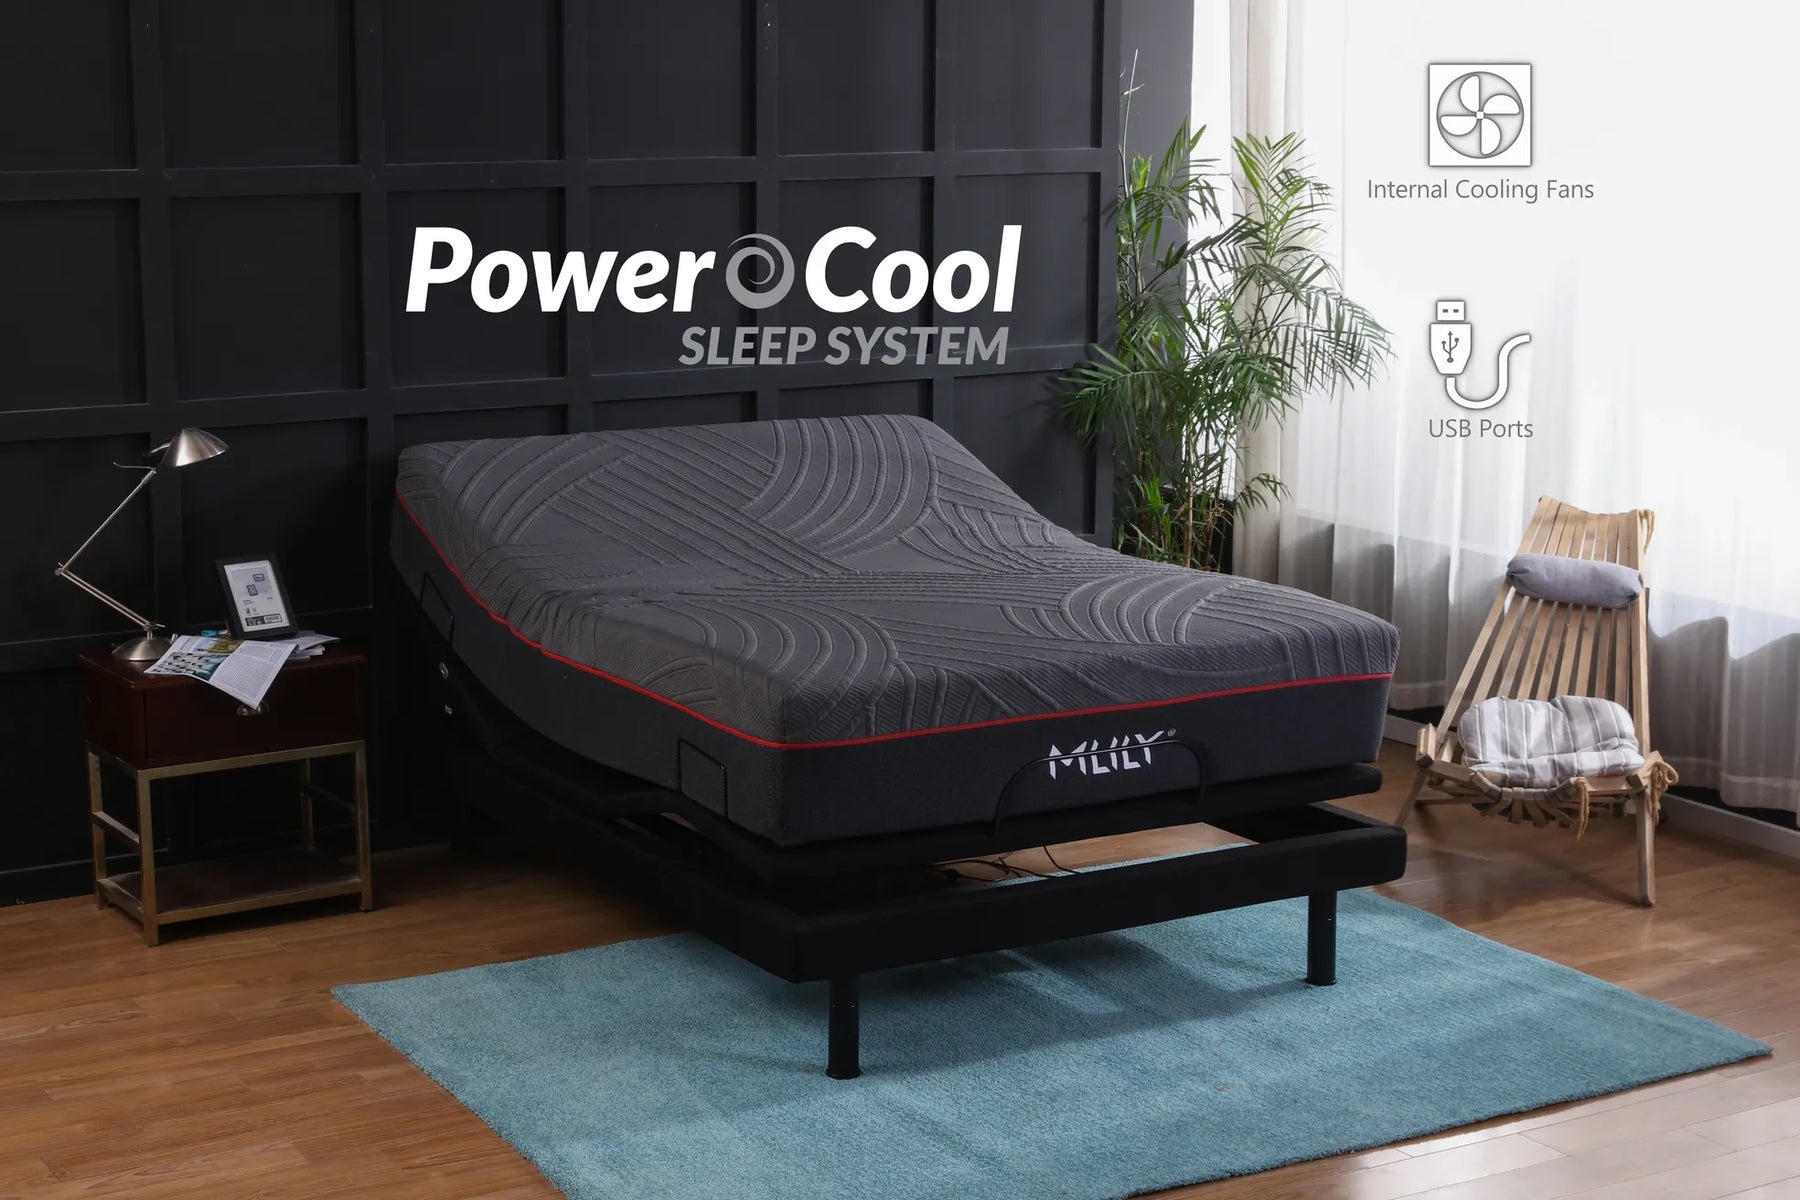 PowerCool Sleep System by Mlily: The Ultimate Electric Bed and Mattress Combo